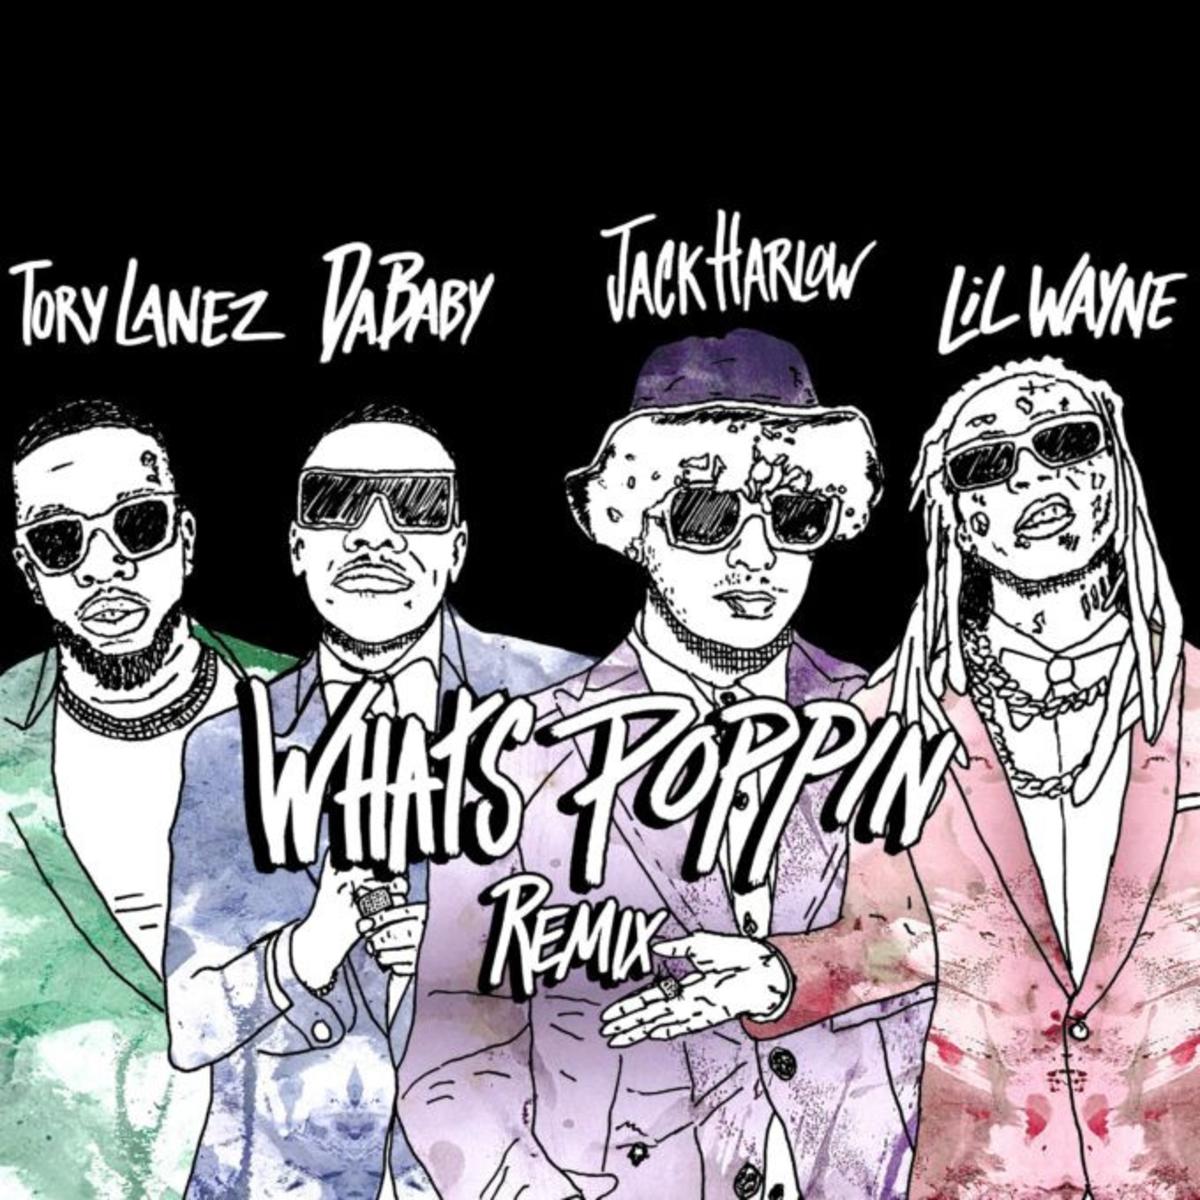 Jack Harlow Releases “WHATS POPPIN (Remix)” With DaBaby, Tory Lanez & Lil Wayne